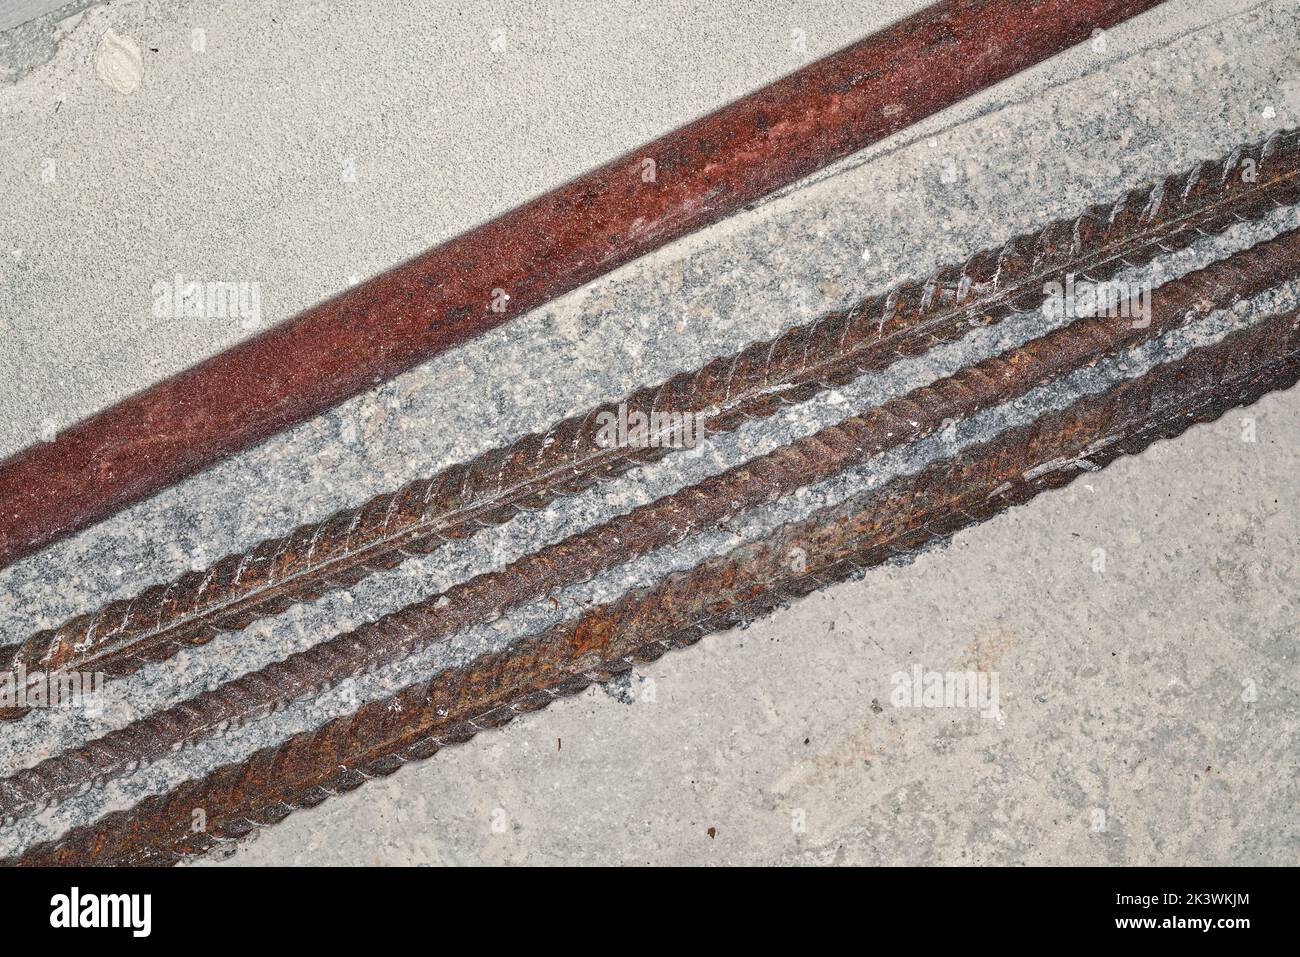 Iron rusty construction rebars on concrete ground at building site closeup detail from above Stock Photo